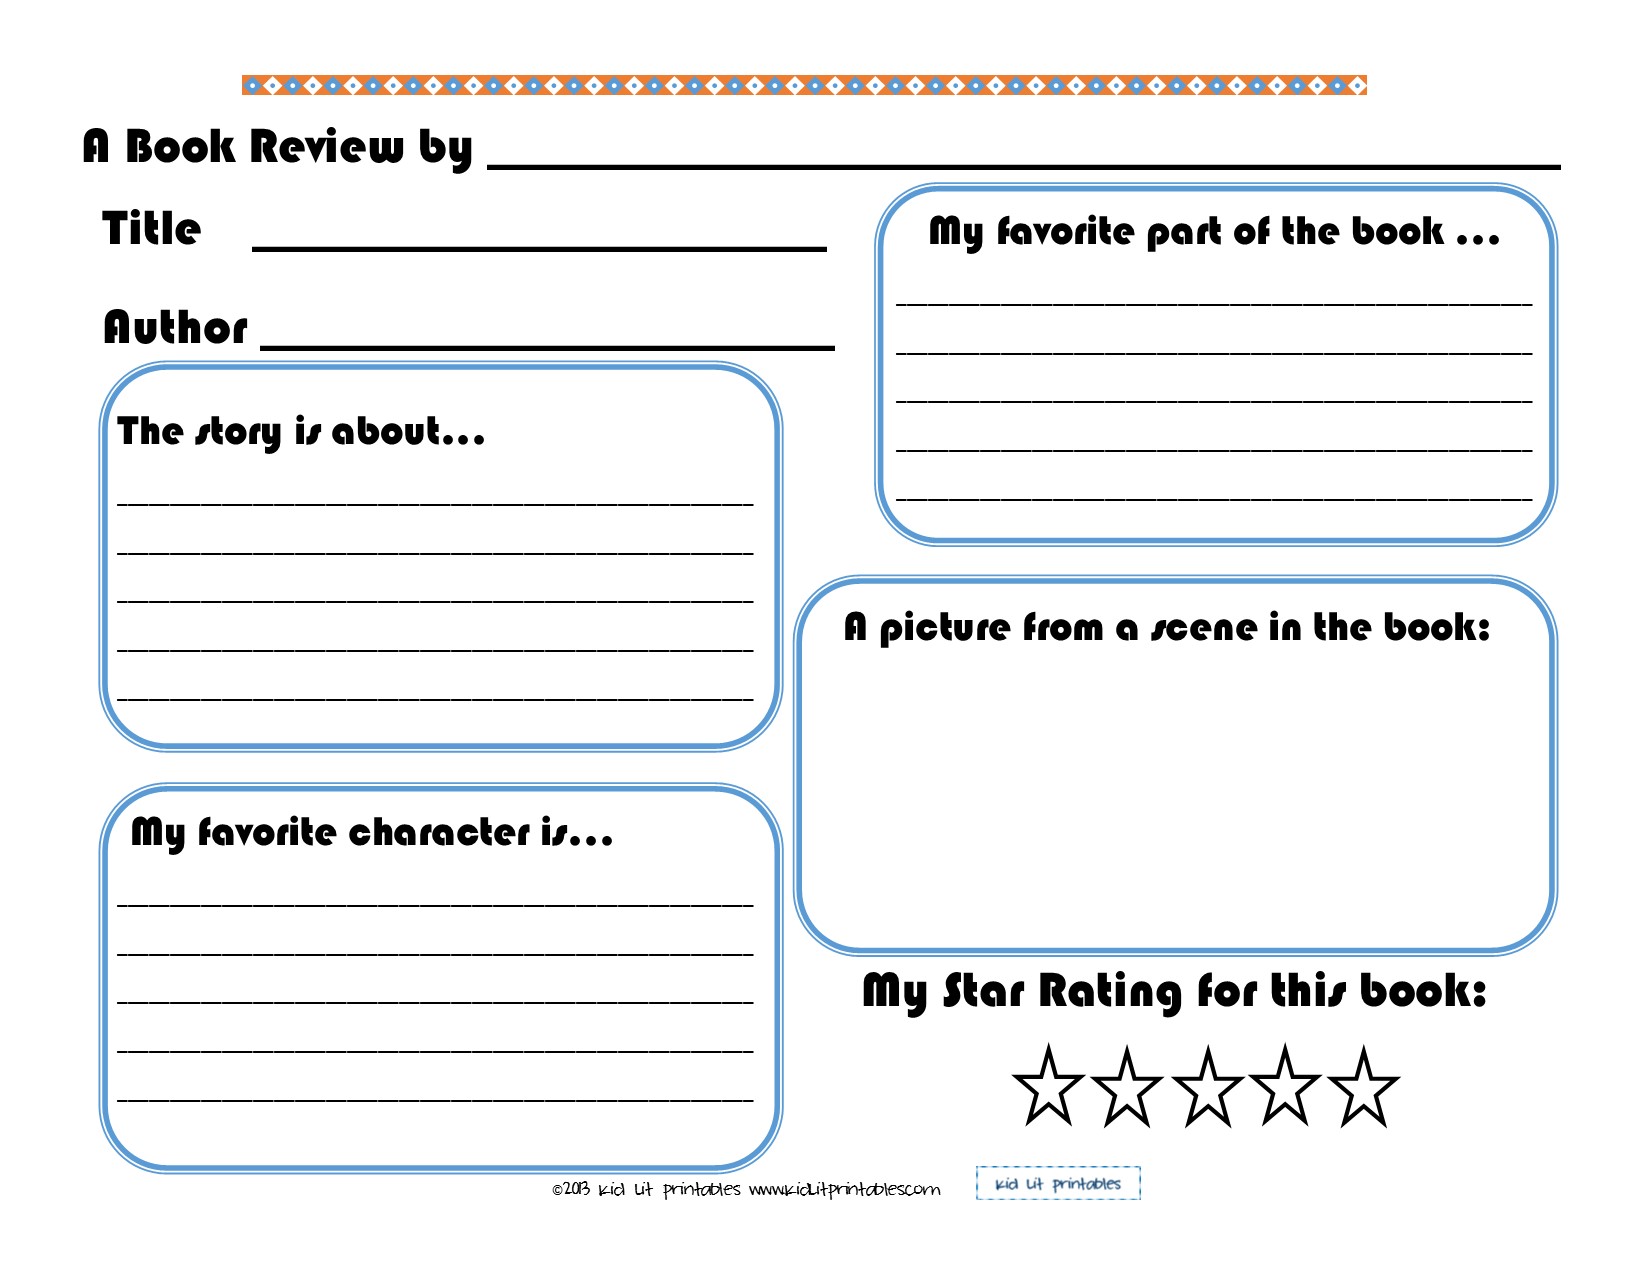 Template of a book report elementary